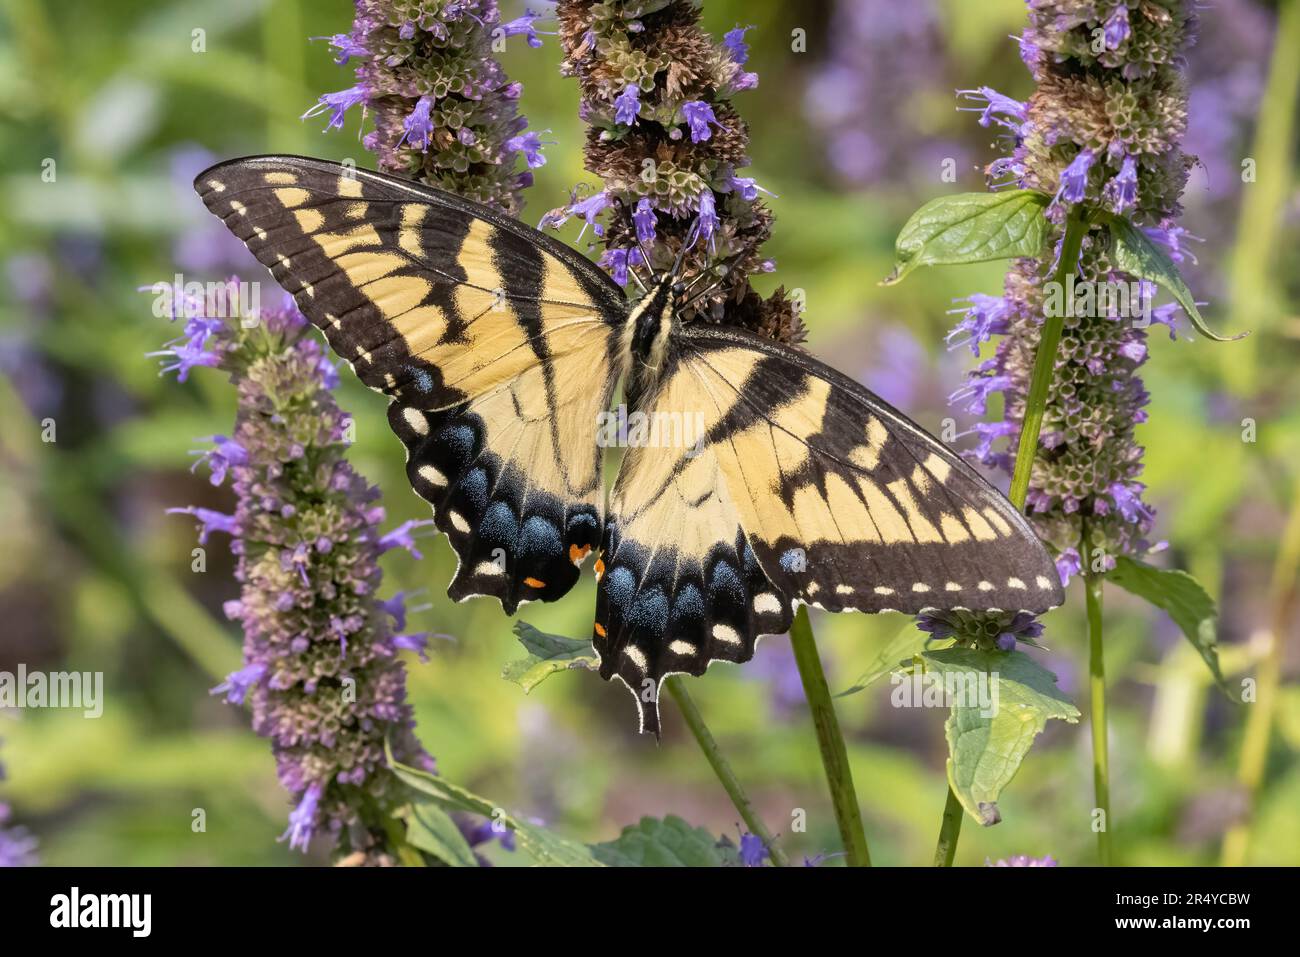 Symbiotic relationship of Eastern Tiger Swallowtail (Pamilio glaucus) on anise hyssop (Agastache foeniculum), Delaware Botanic Gardens, Delaware Stock Photo